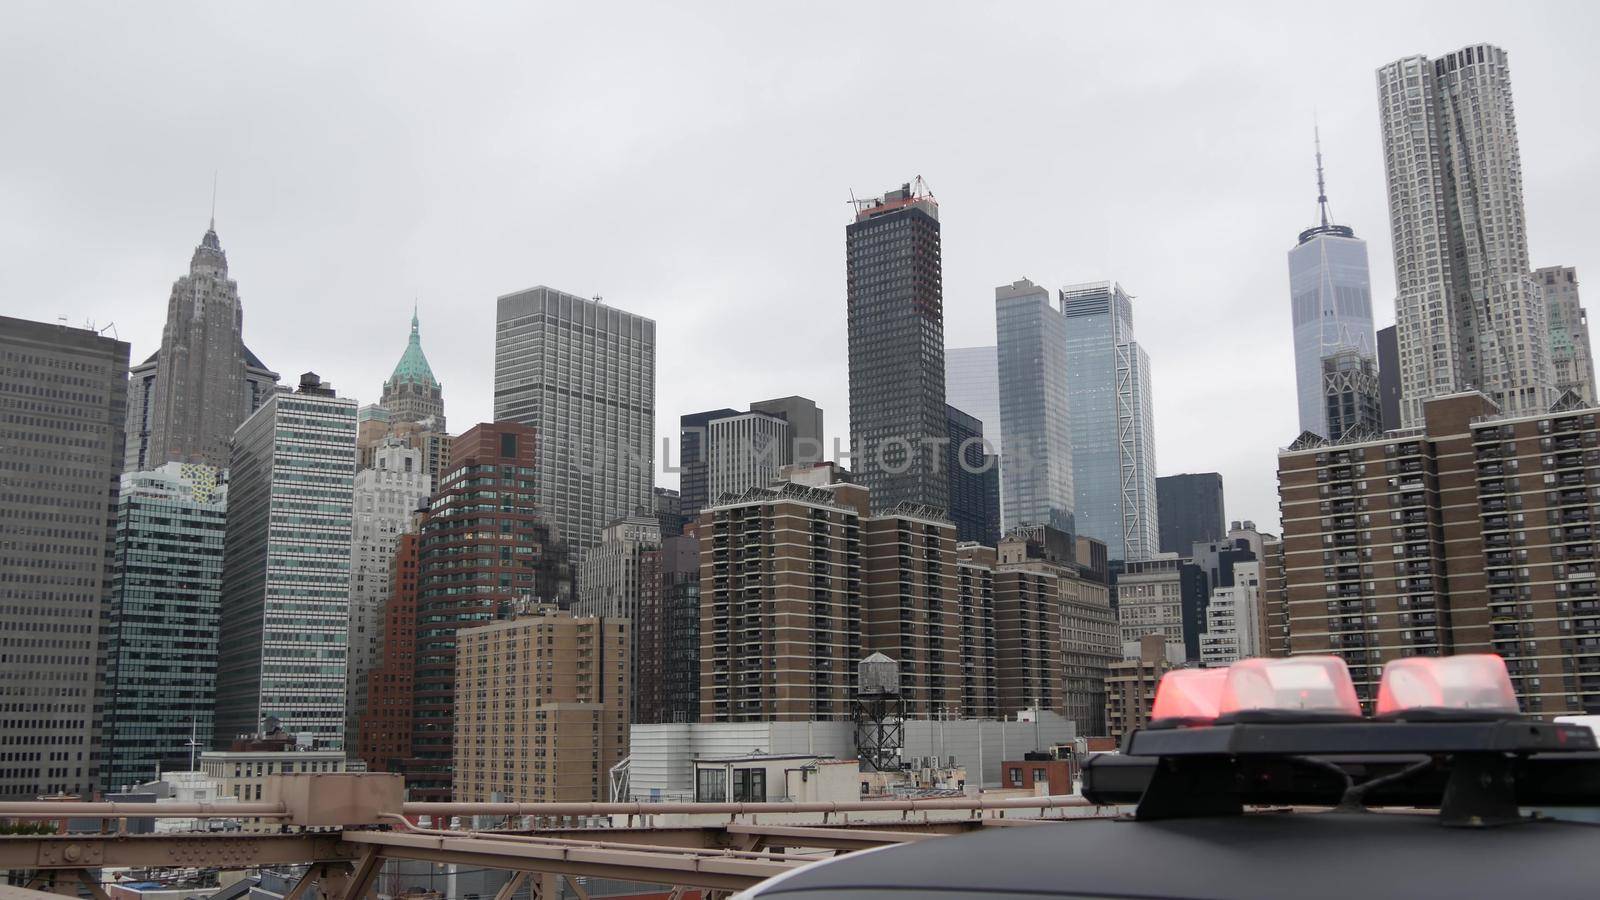 NEW YORK CITY, USA - 12 MAR 2020: Emergency siren glowing, 991 police patrol car on Brooklyn bridge. NYPD auto, symbol of crime prevention and safety in Manhattan. Metropolis security and protection by DogoraSun